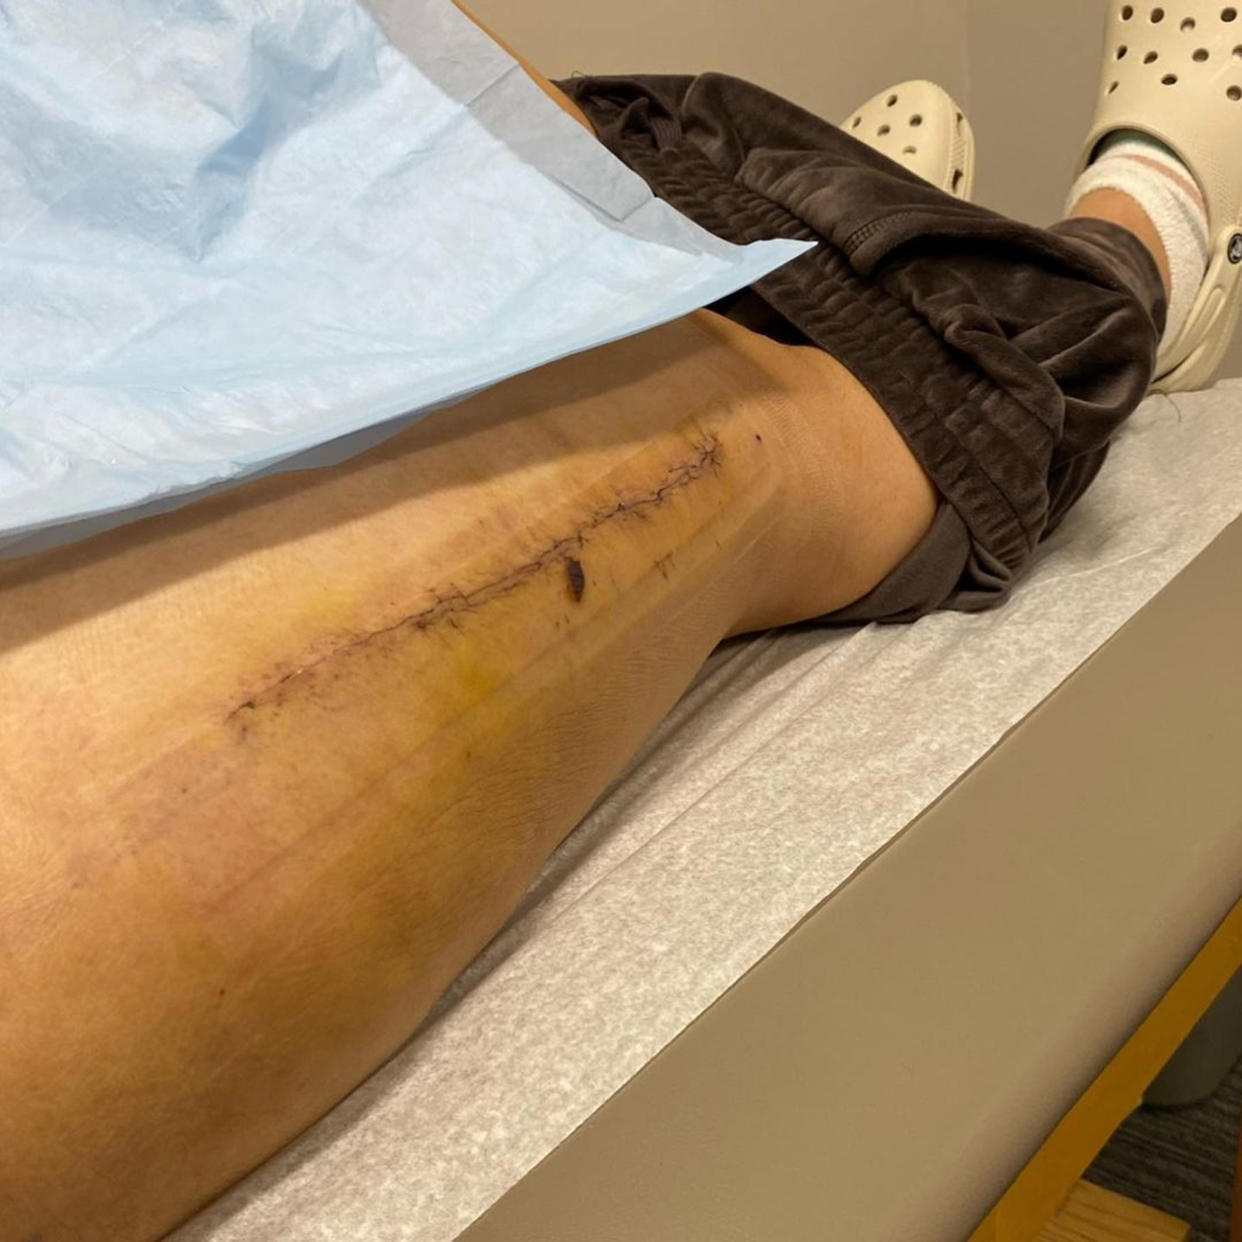 Doctors were hoping to avoid surgery, but when Franco developed acute compartment syndrome in her right leg, she had to undergo a fasciotomy. (Courtesy Kaelyn Franco)